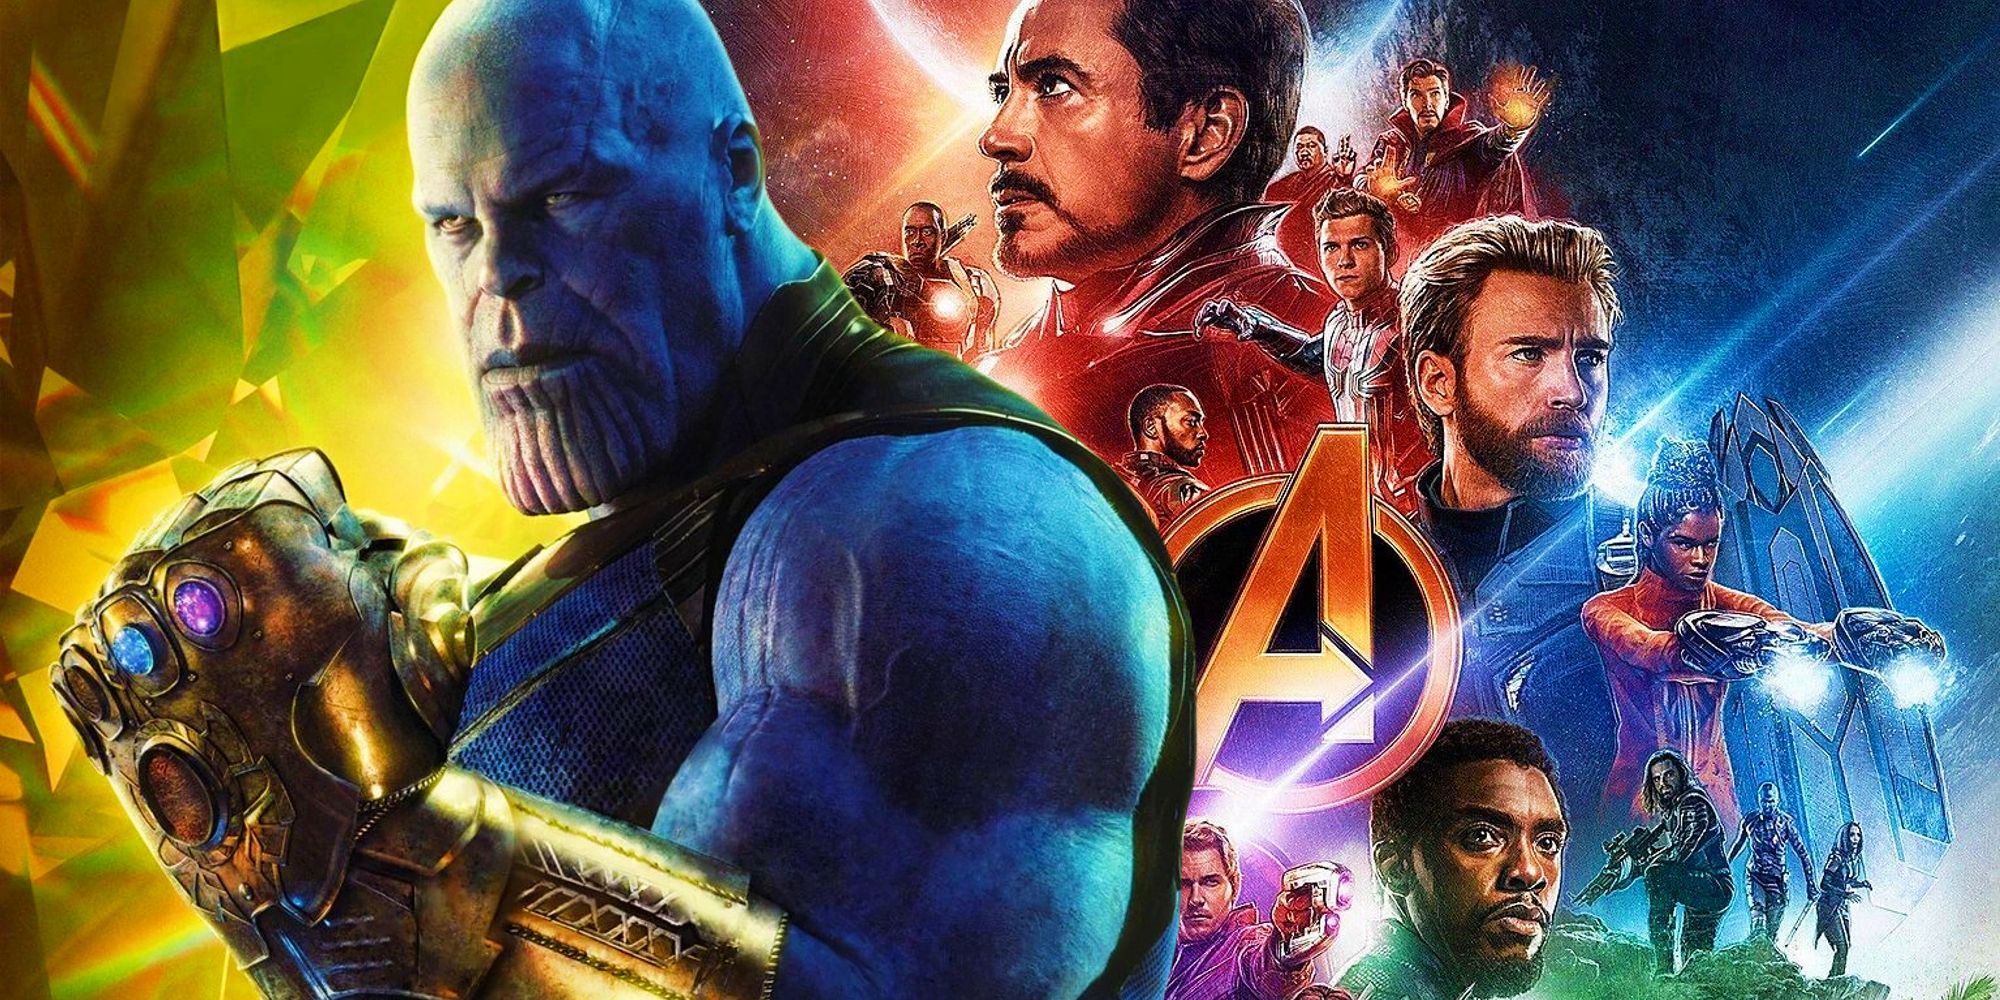 Thanos wielding the Infinity Gauntlet next to the poster for Avengers: Infinity War